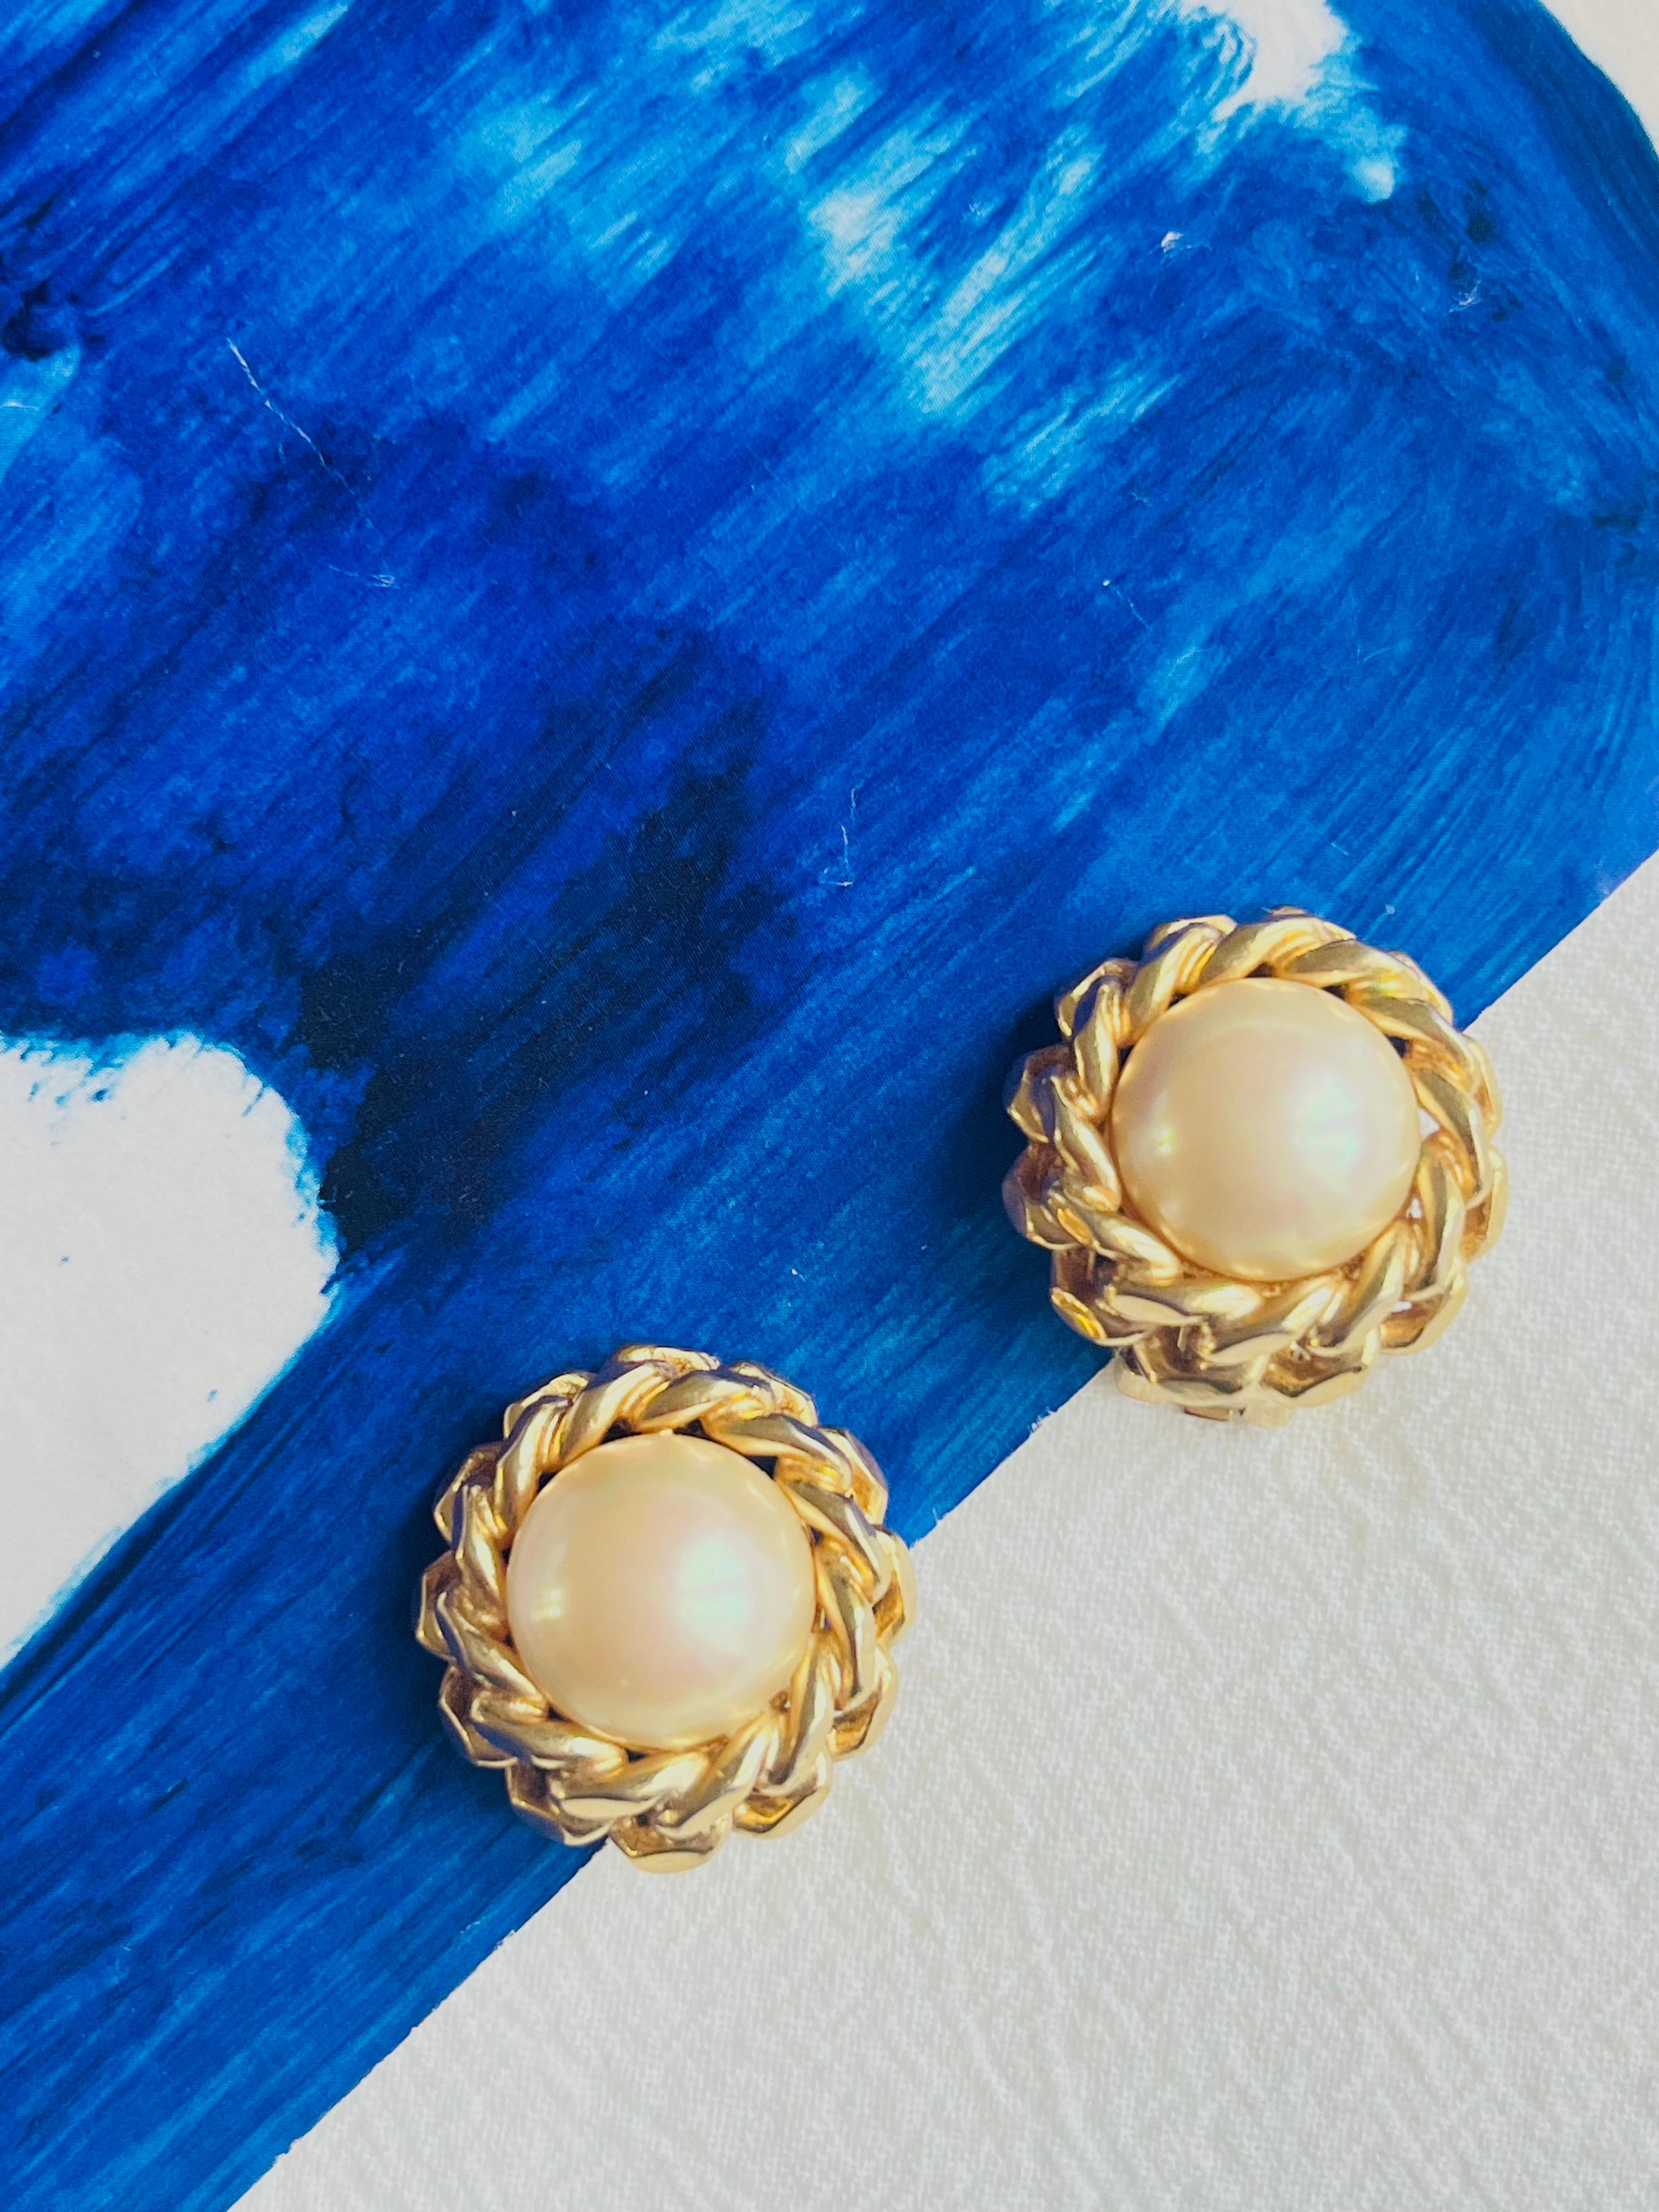 Christian Dior Vintage Large Round Pearl Rope Twist Interlock Clip Gold Earrings In Excellent Condition For Sale In Wokingham, England